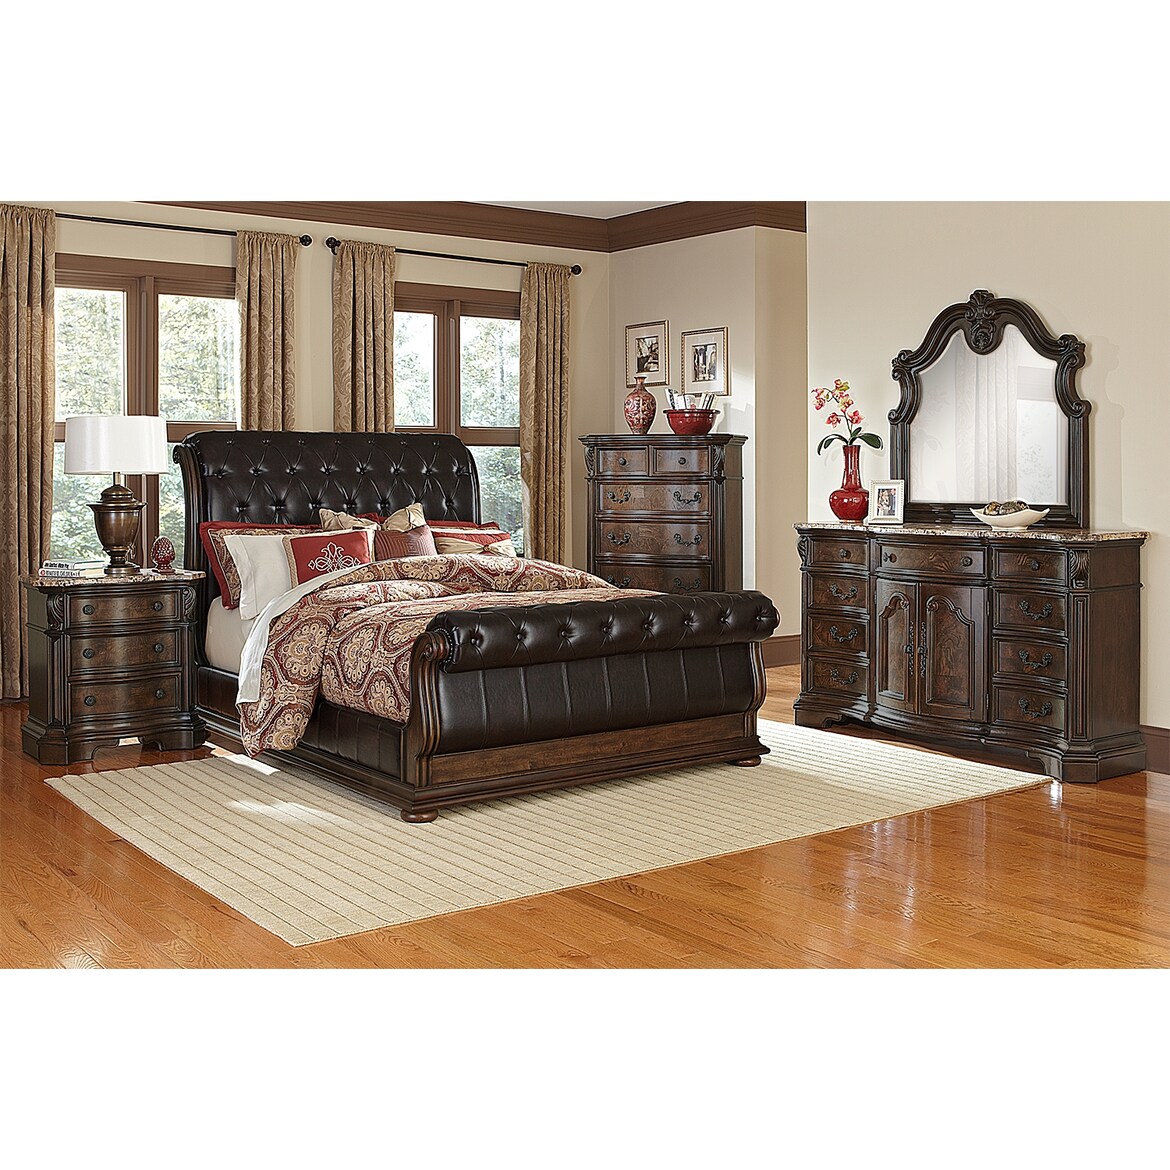 Monticello Upholstered Sleigh Bed